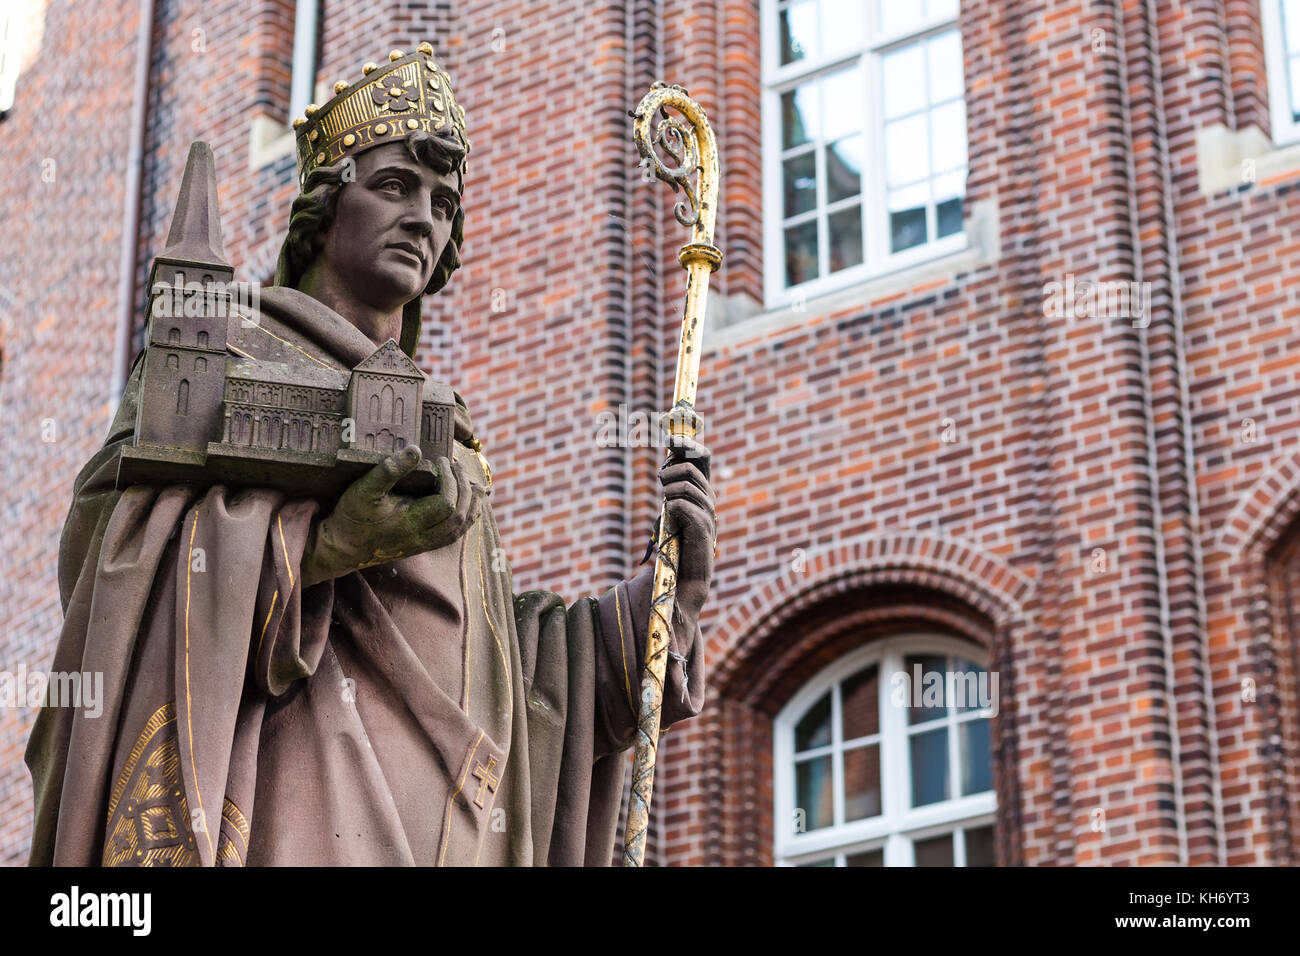 Travel to Germany - statue of statue was of St Angsar ( Archbishop Ansgar von Hamburg - Bremen, the founder of Hamburg cathedral in Old Town) on Trost Stock Photo